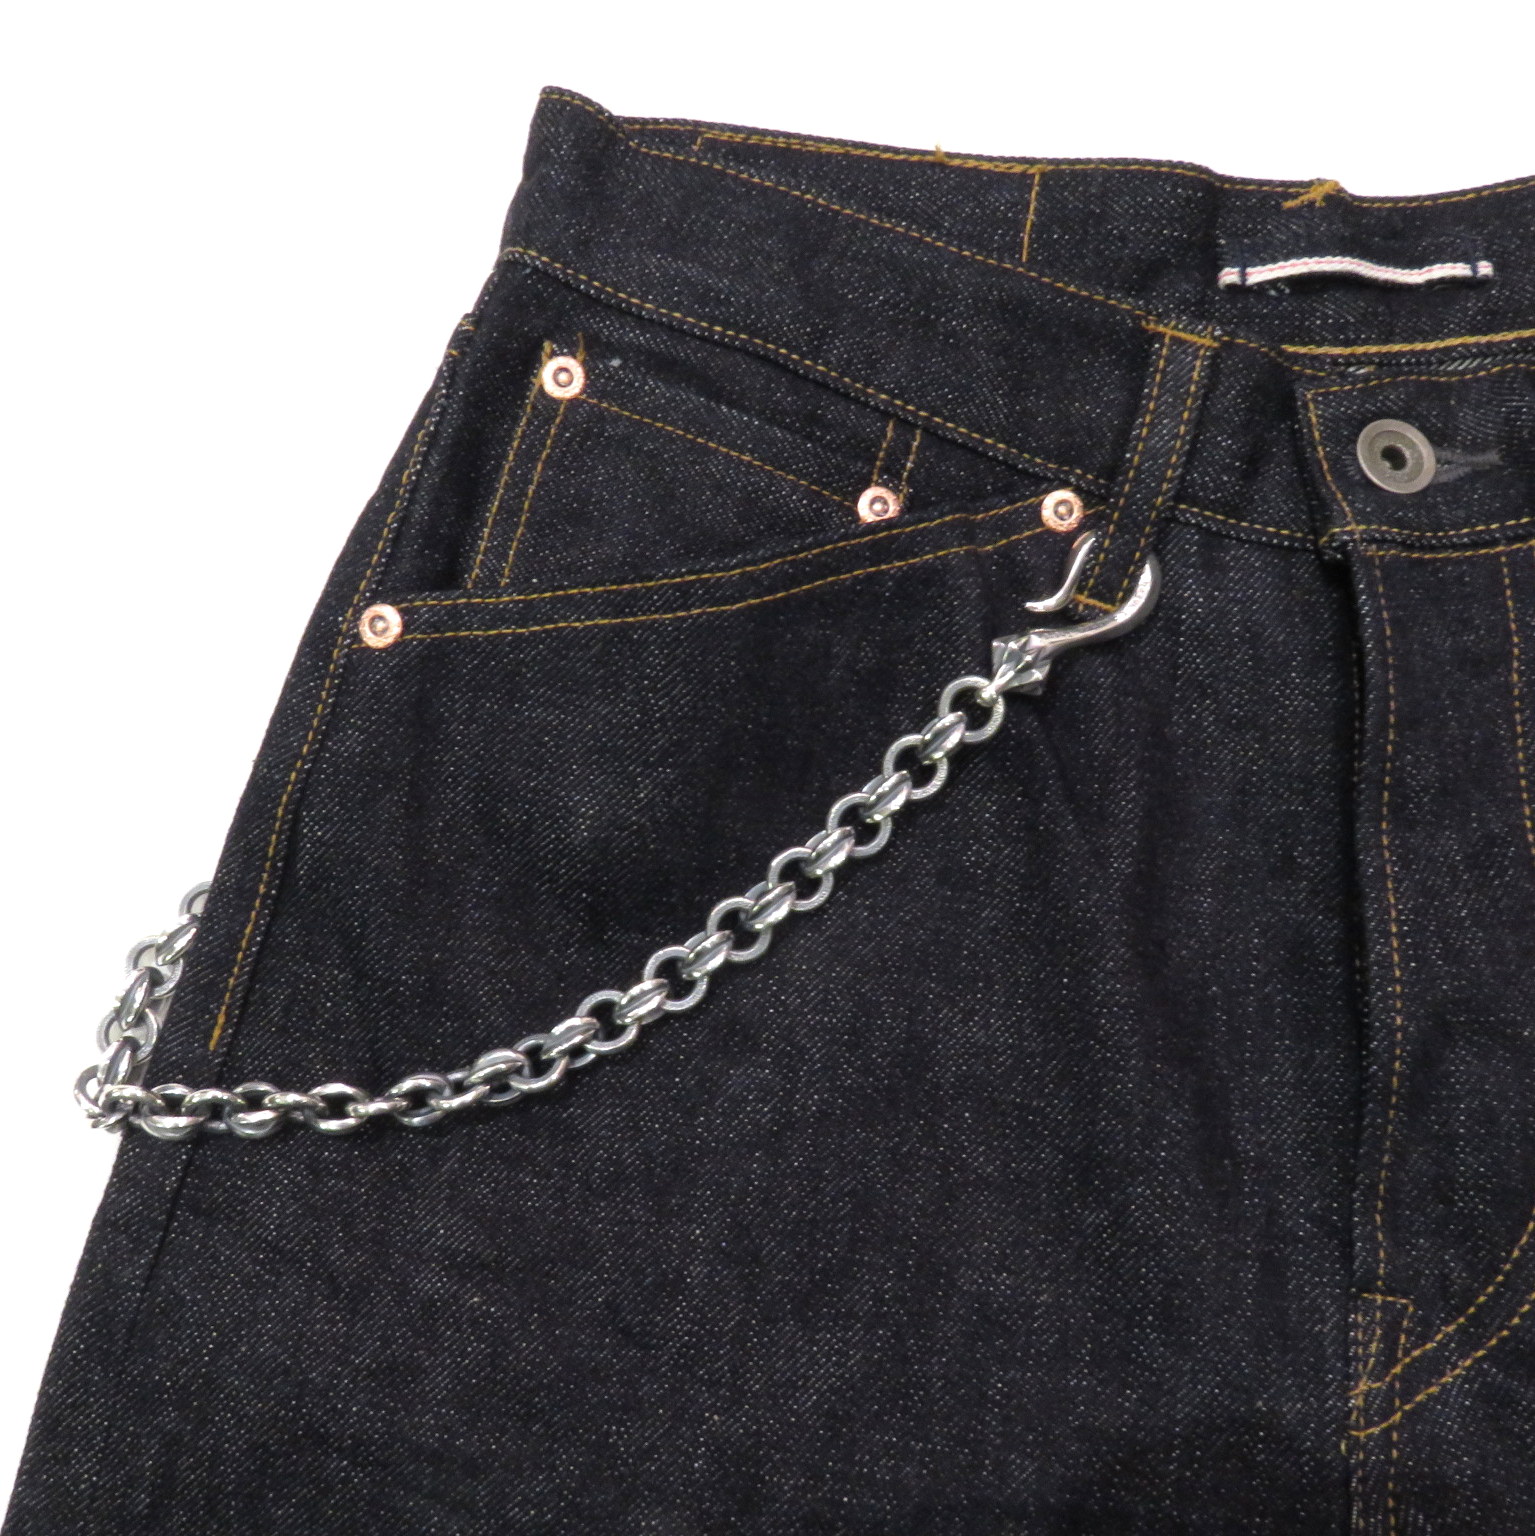 THERE(ゼア)】 “Crooked Wallet Chain” クロケッドウォレットチェーン 